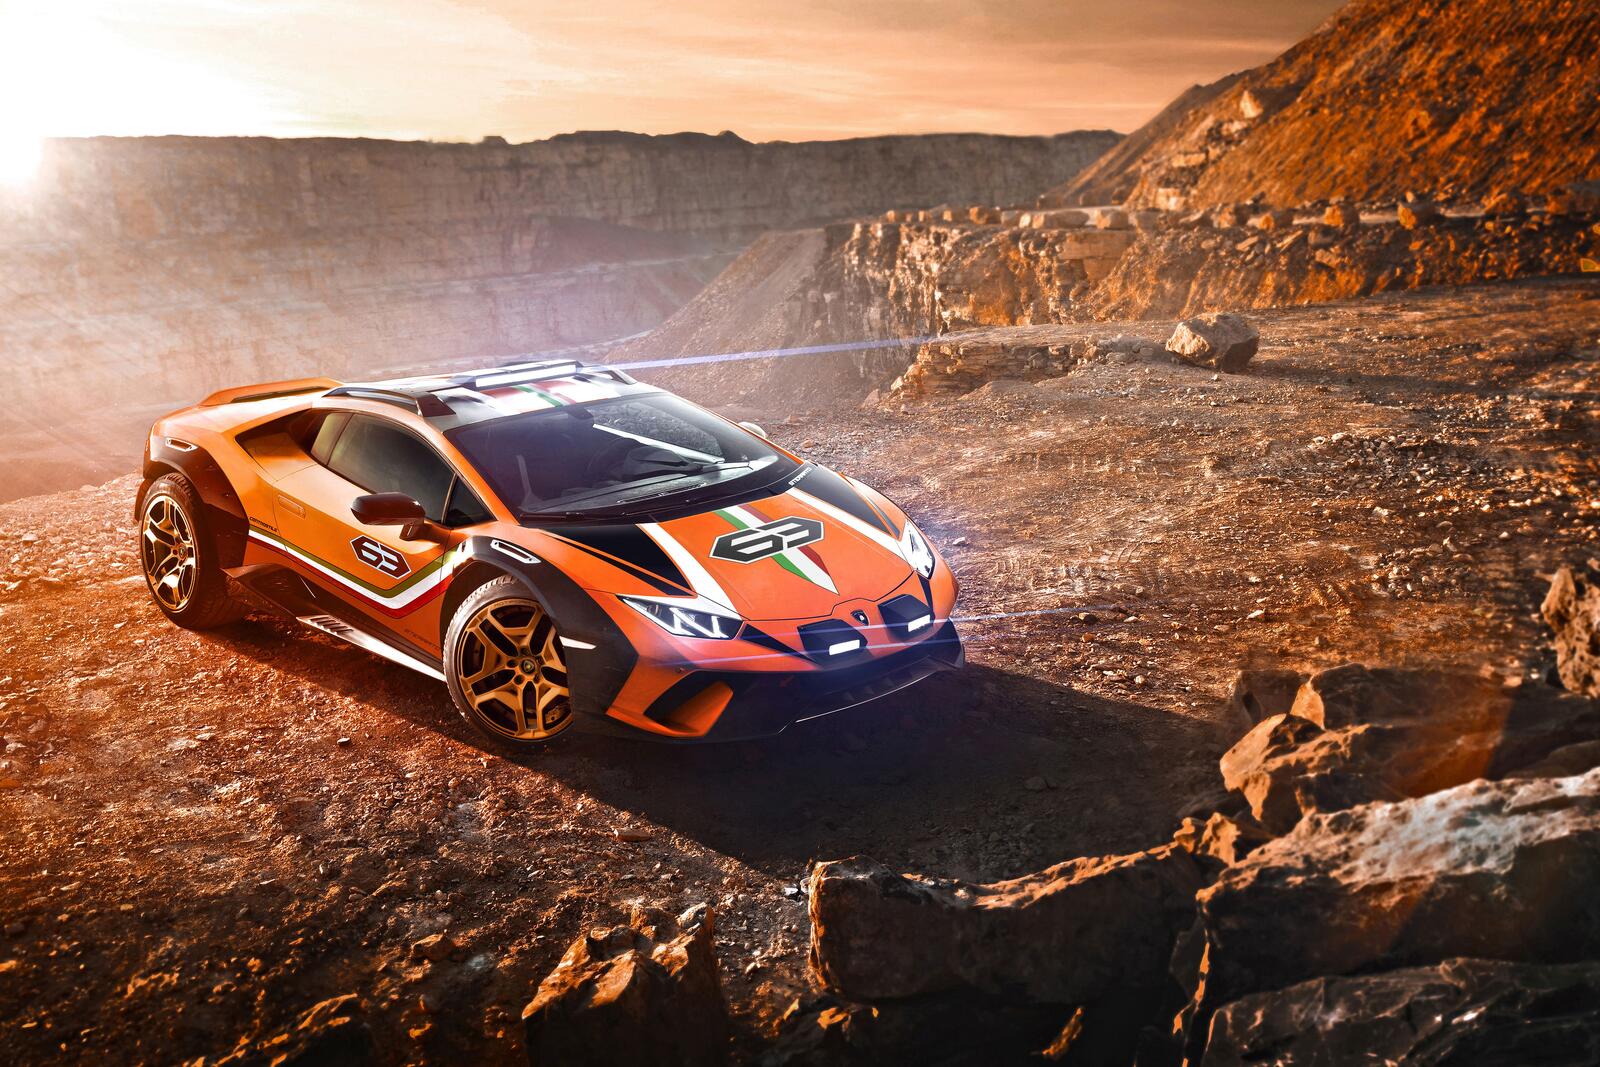 Free photo Picture of a lamborghini off-roading in a sandpit